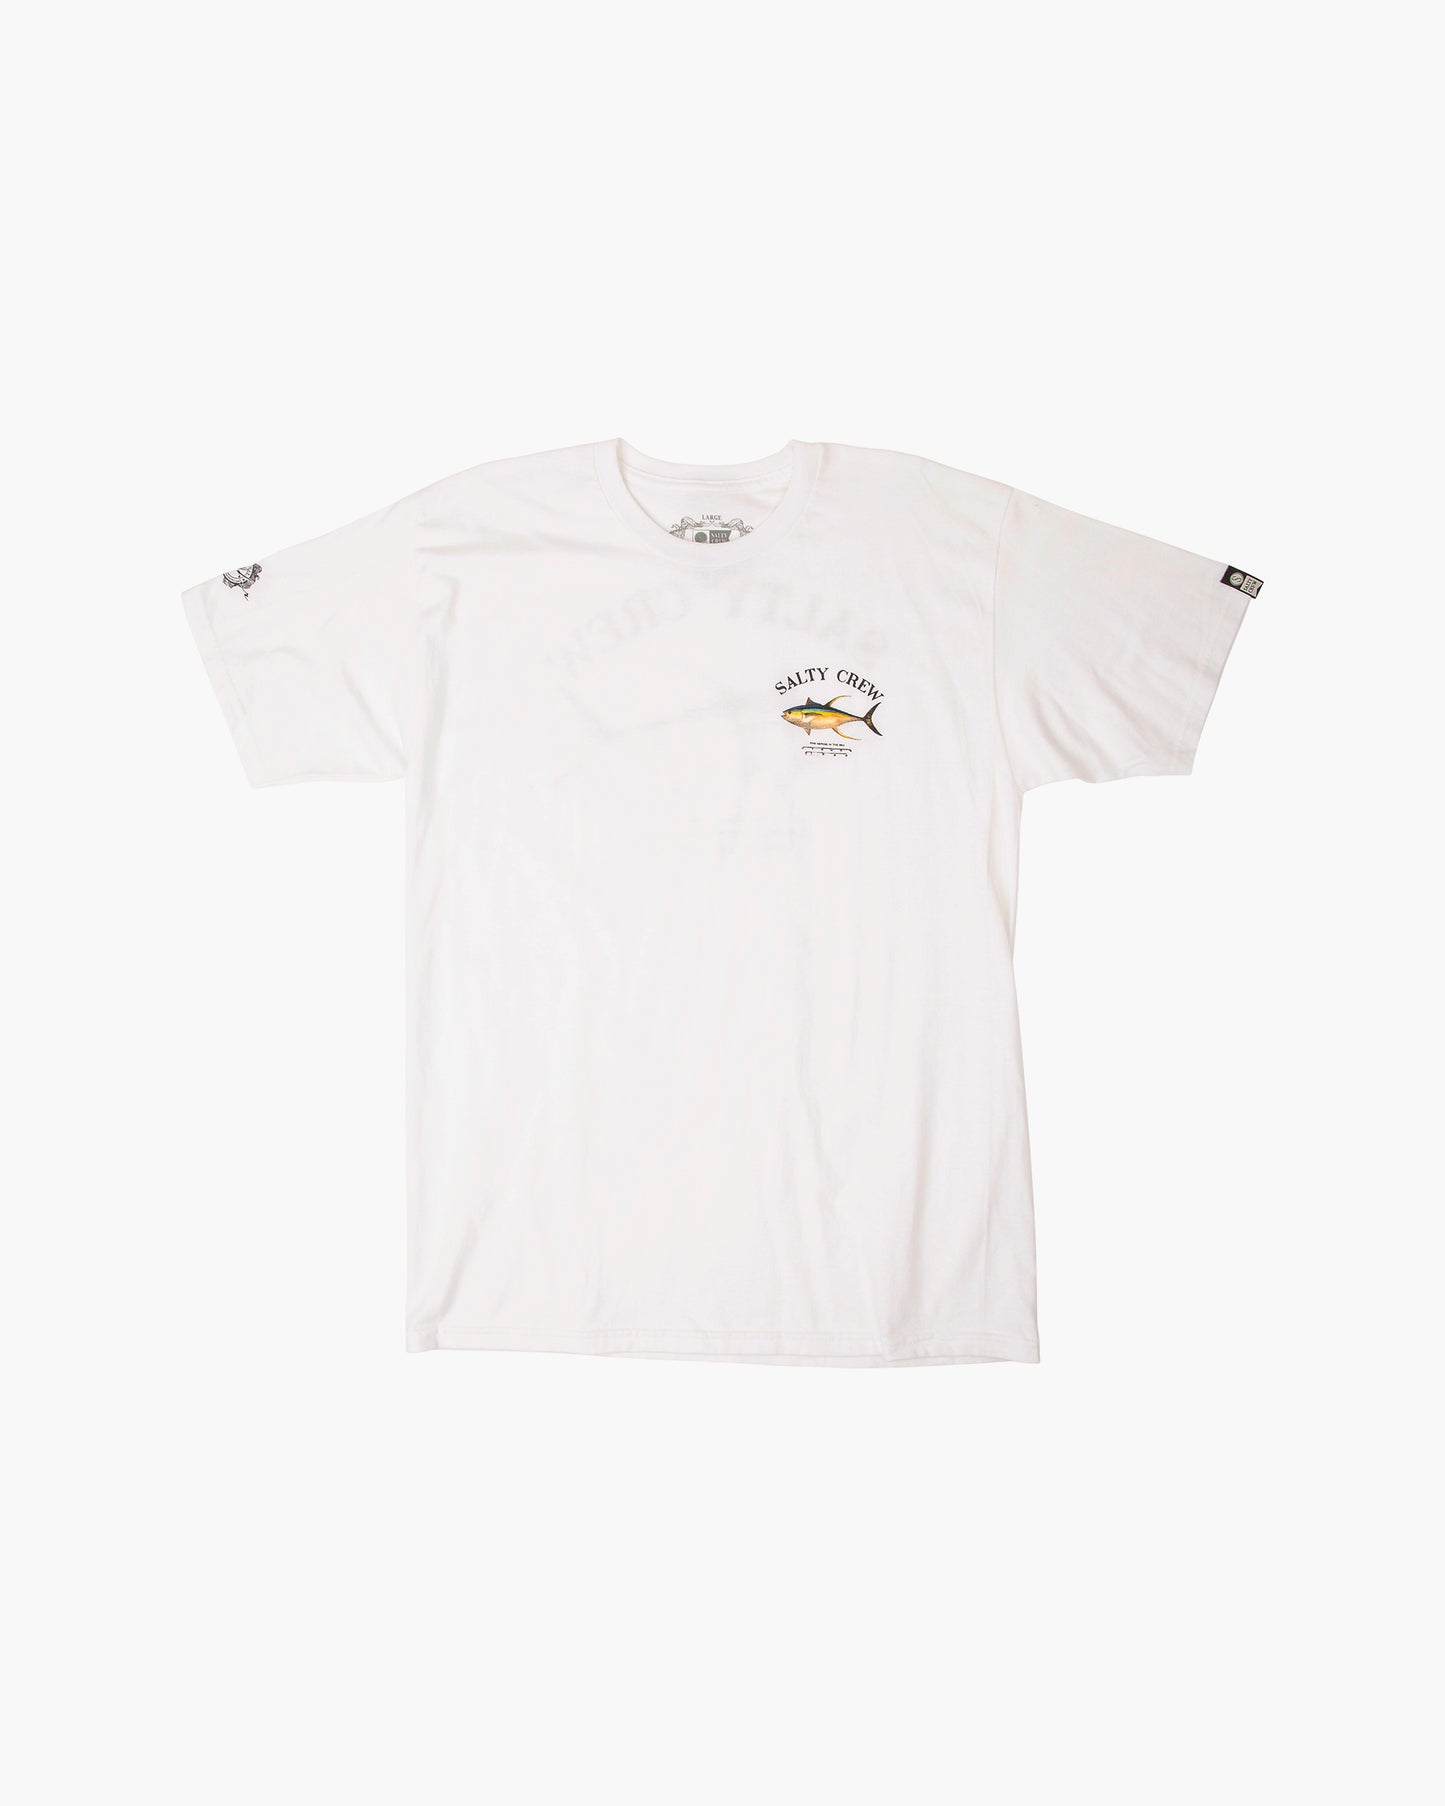 Off body front of Ahi Mount White S/S Standard Tee